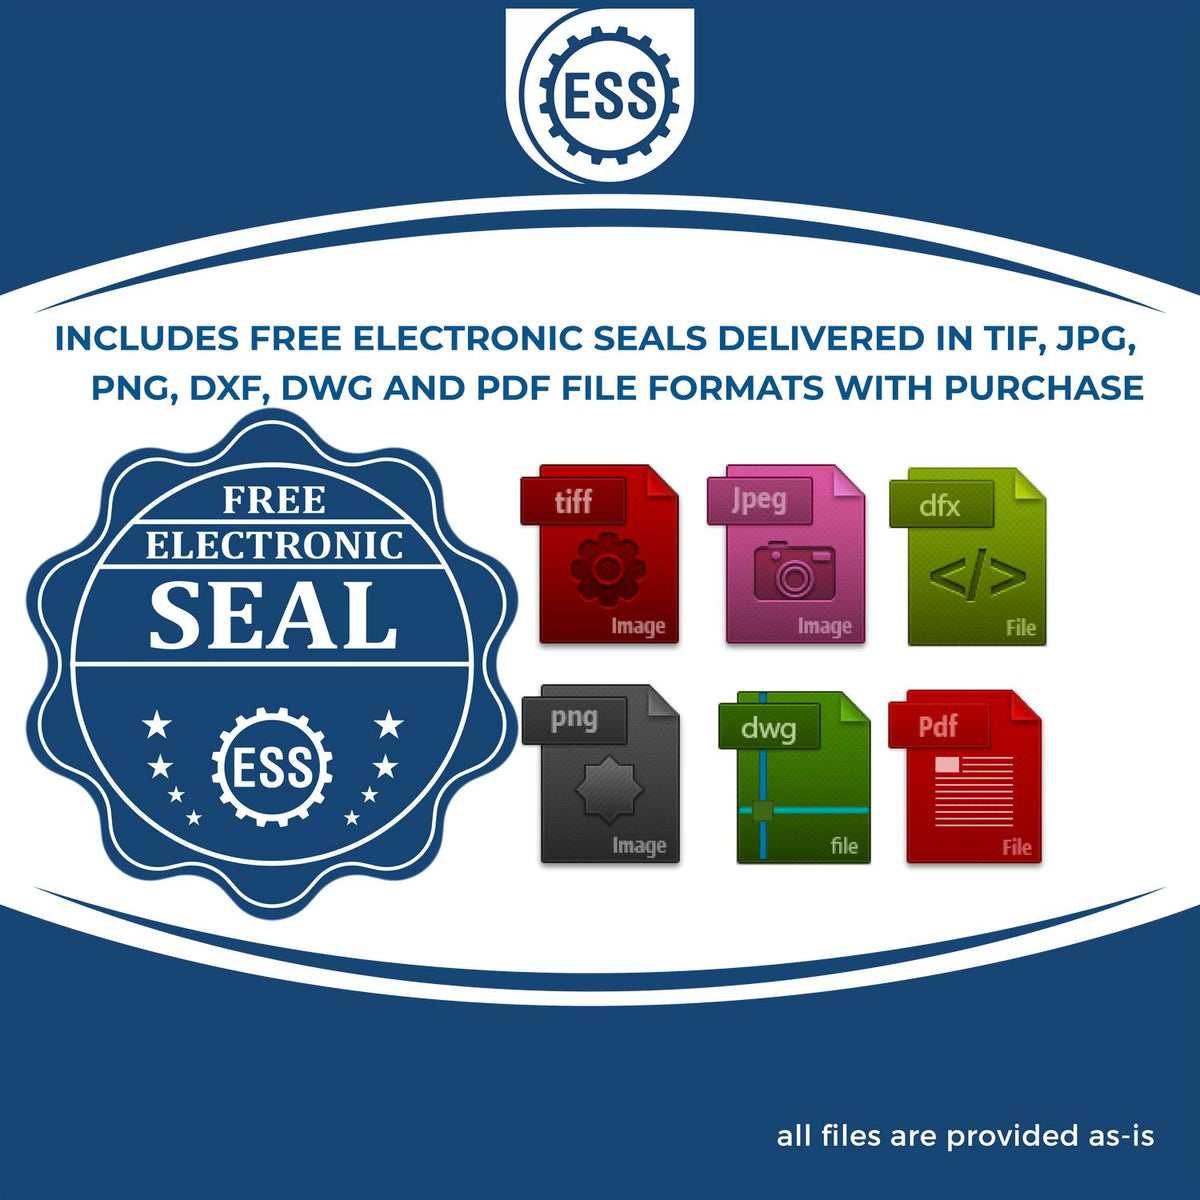 An infographic for the free electronic seal for the Massachusetts Geologist Desk Seal illustrating the different file type icons such as DXF, DWG, TIF, JPG and PNG.